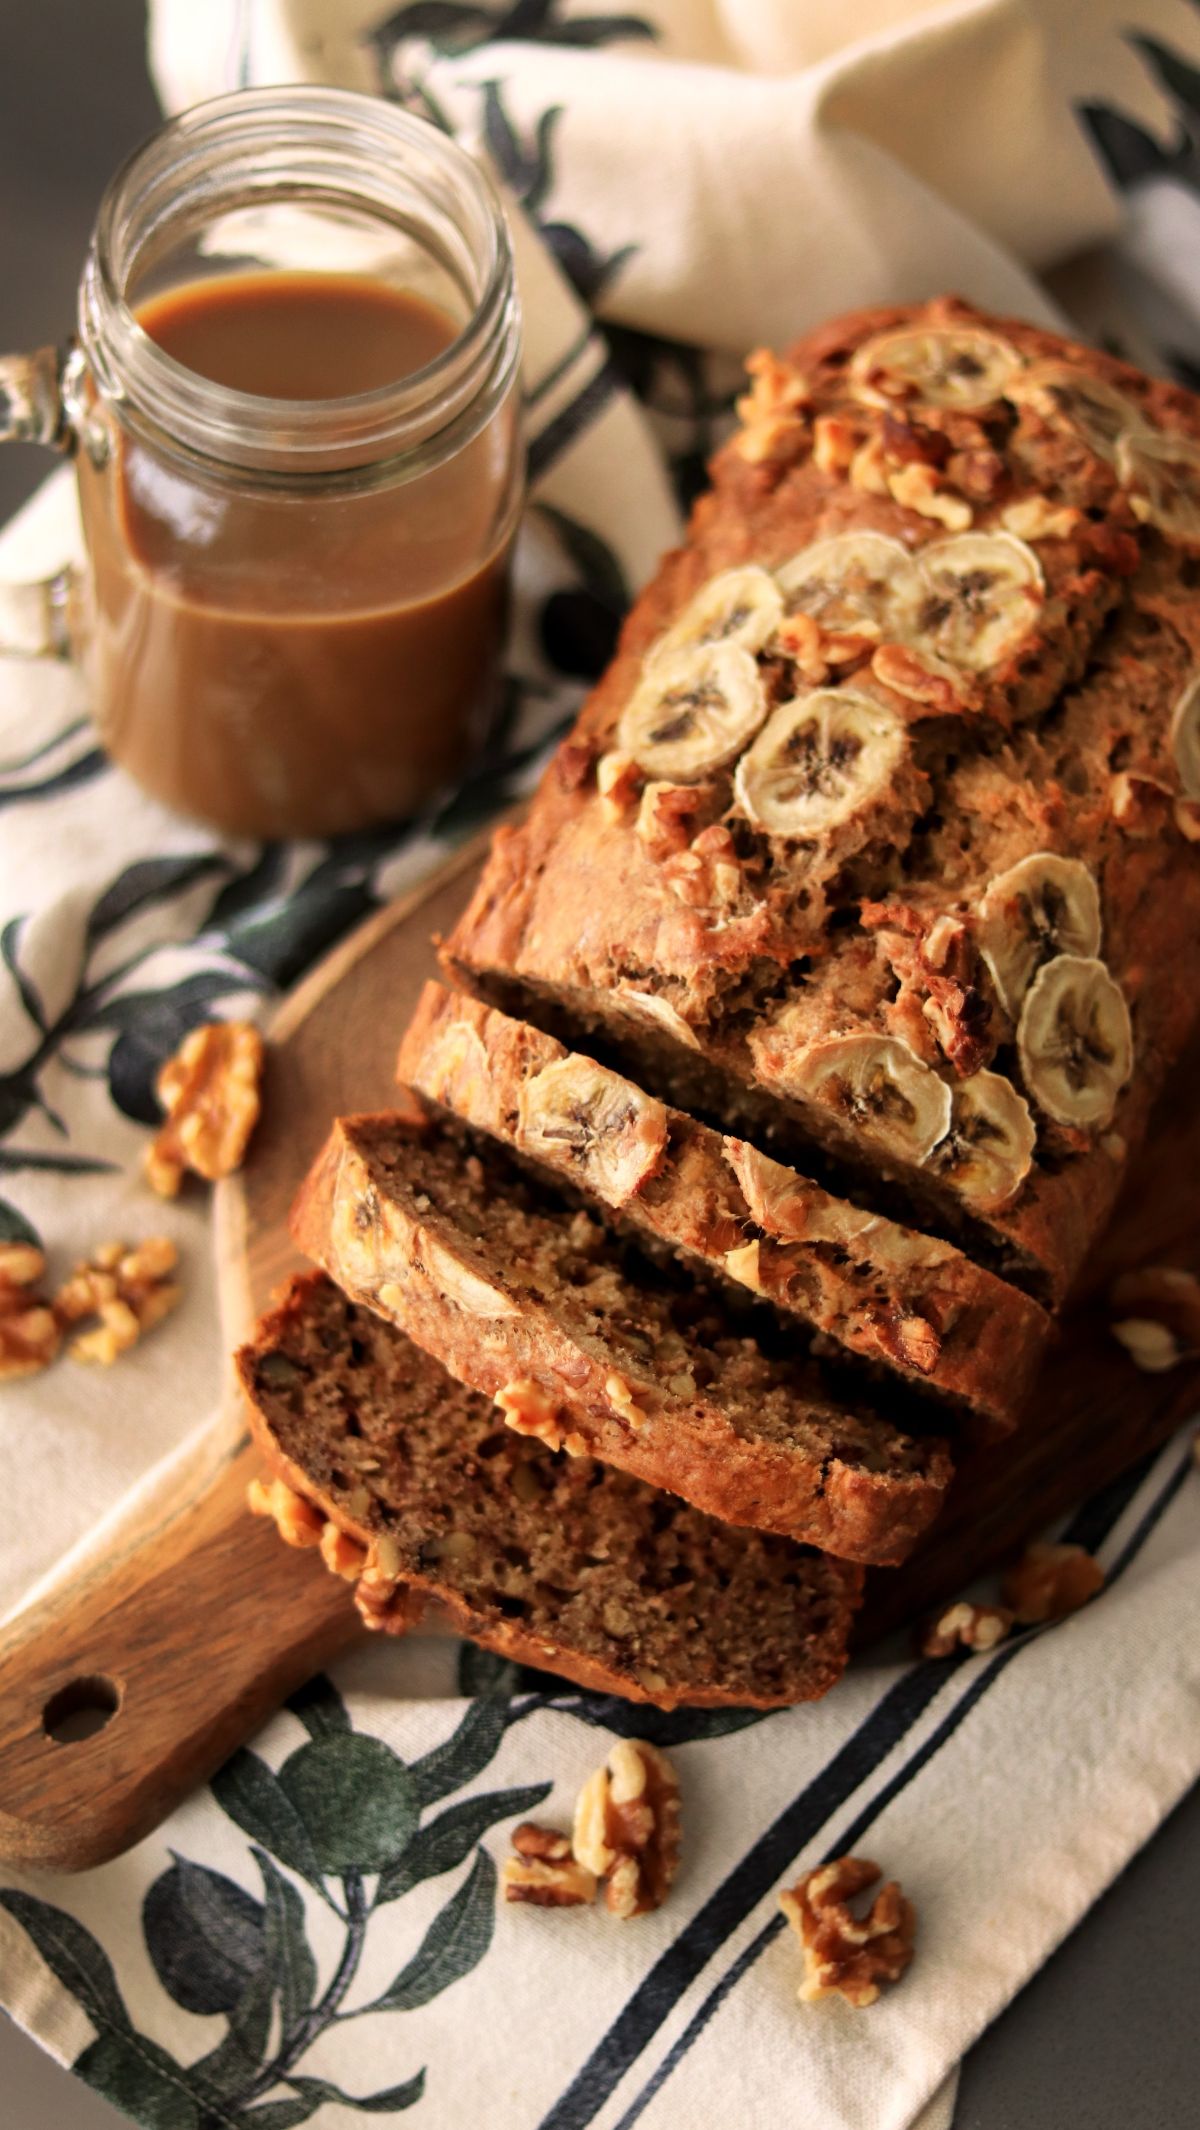 How To Make Banana Bread: A Trio of Unique Variants for Your Next Baking Adventure